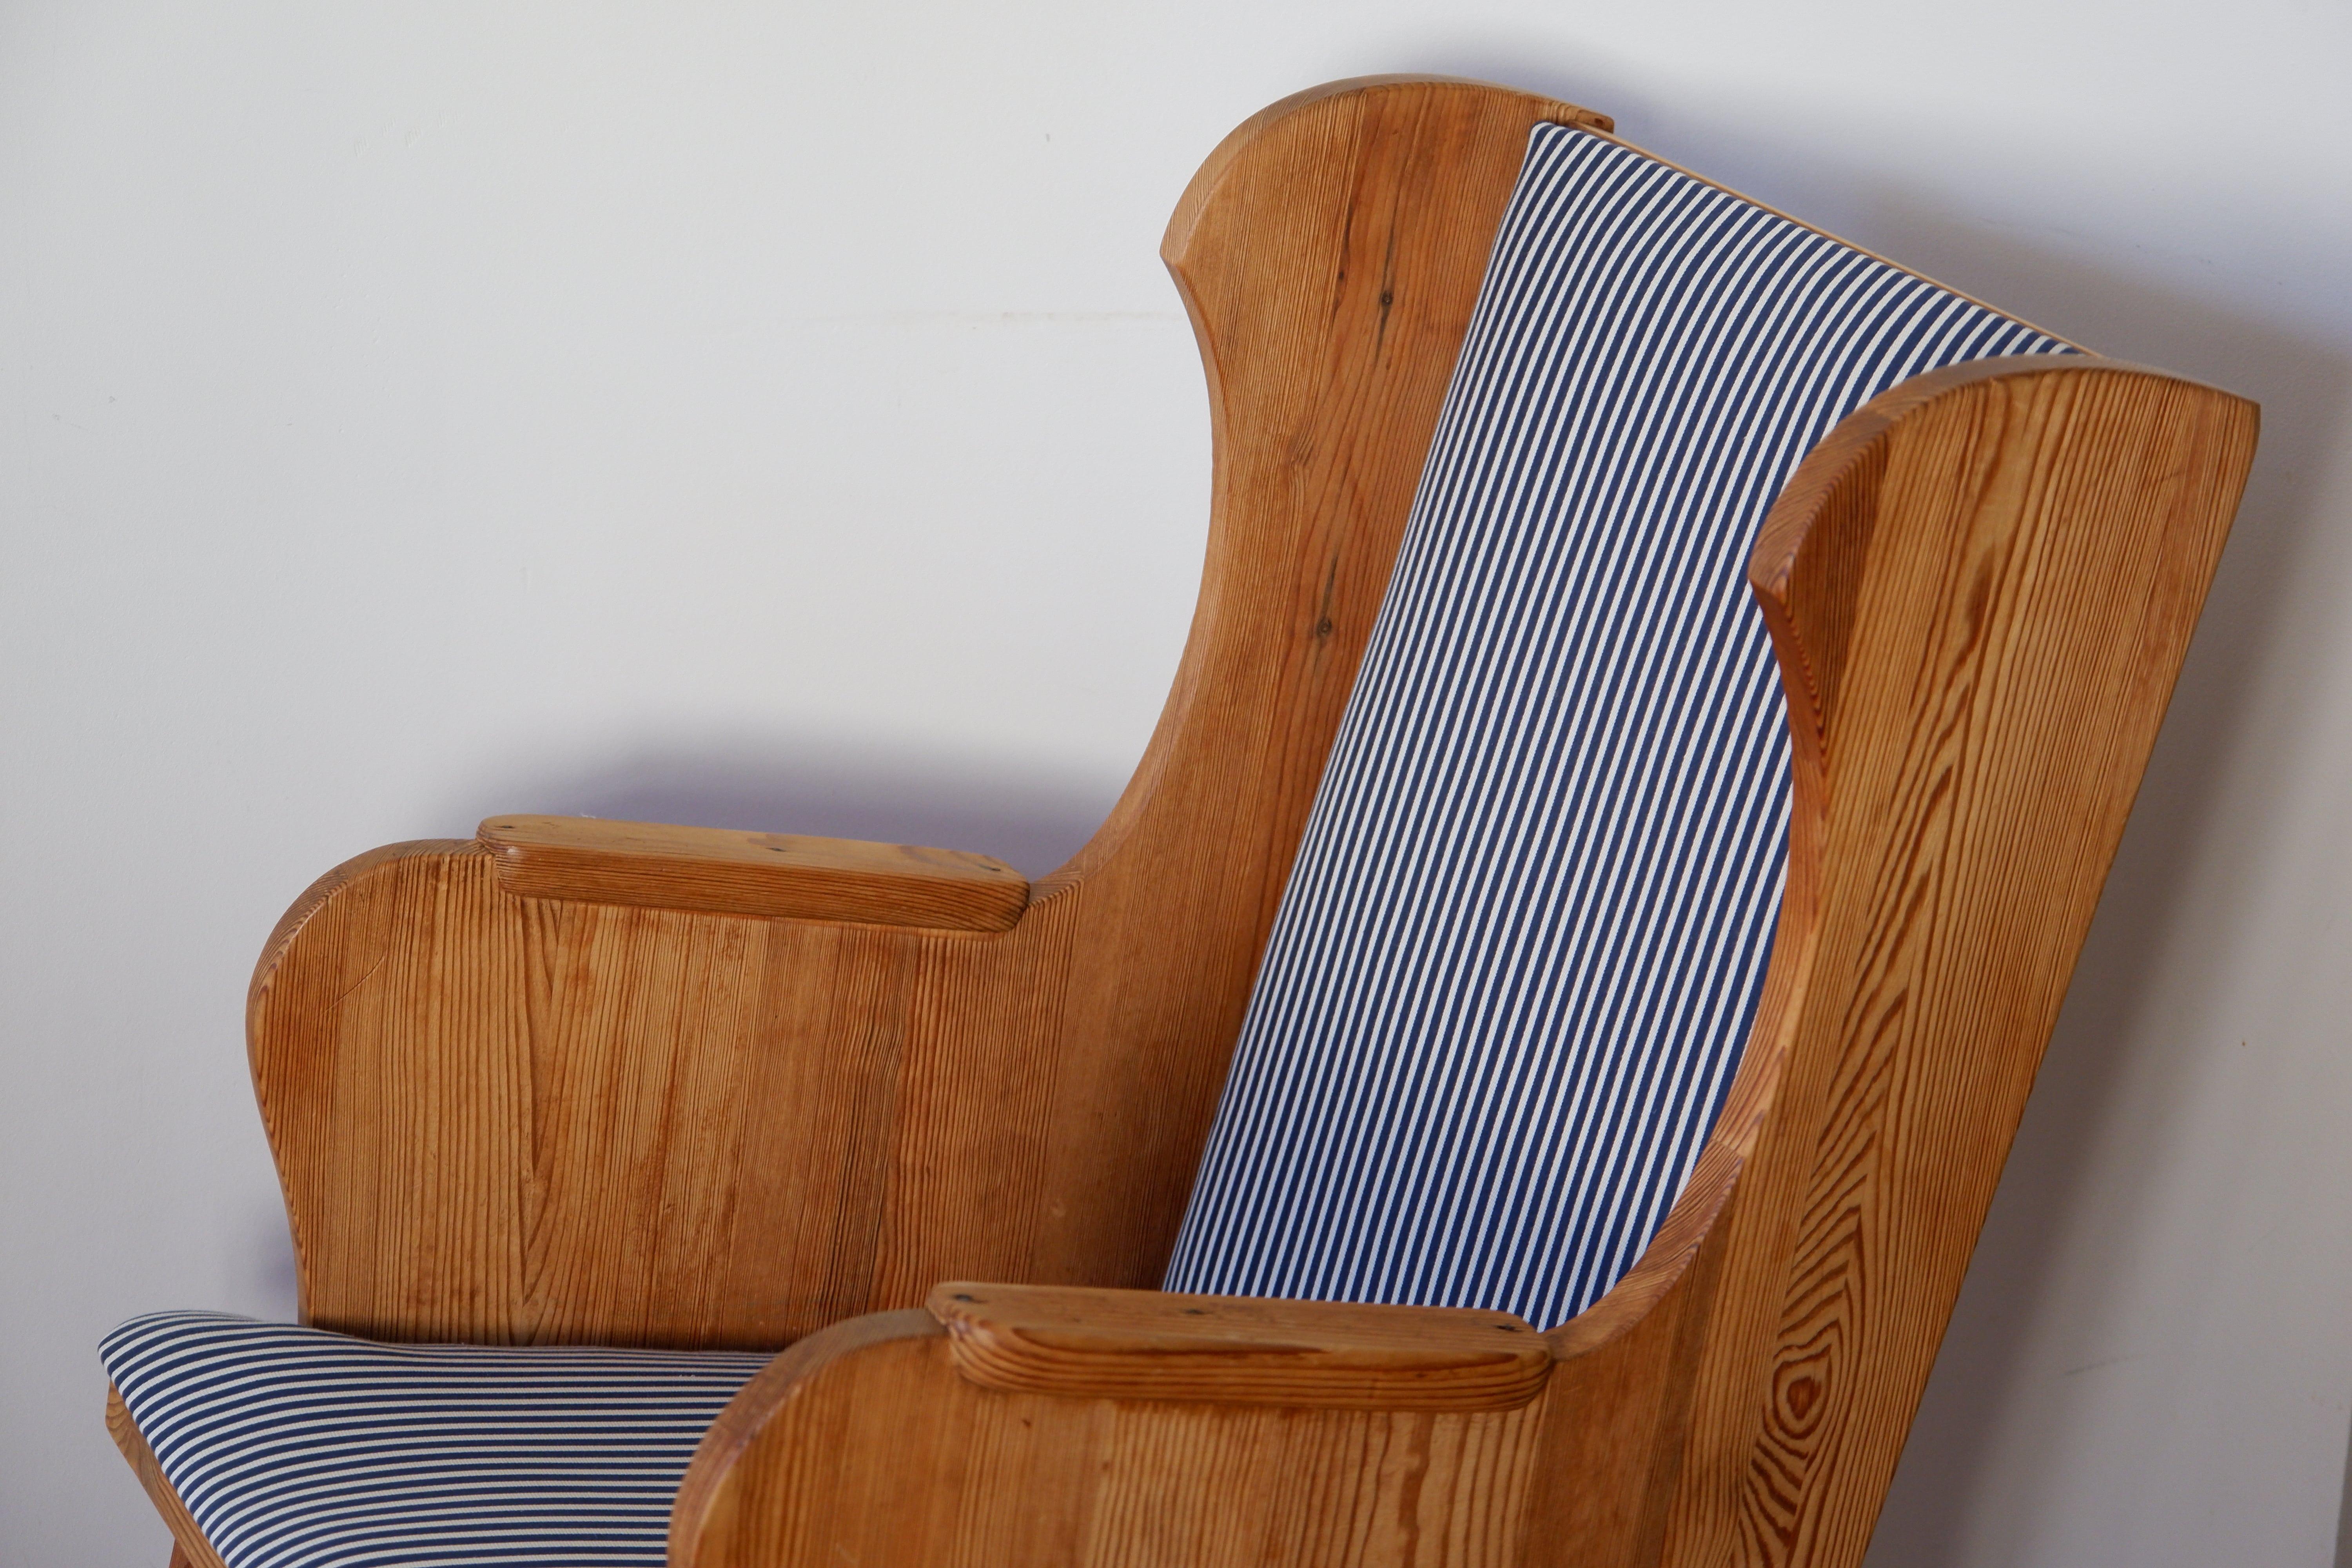 Rare rocking chair designed by Axel Einar Hjorth in the 30's and produced by Nordiska Kompaniet during around 1939. The chair is made in solid pine from Sweden. Its structure is intact and the chair has expericend some minor restaurantion on its